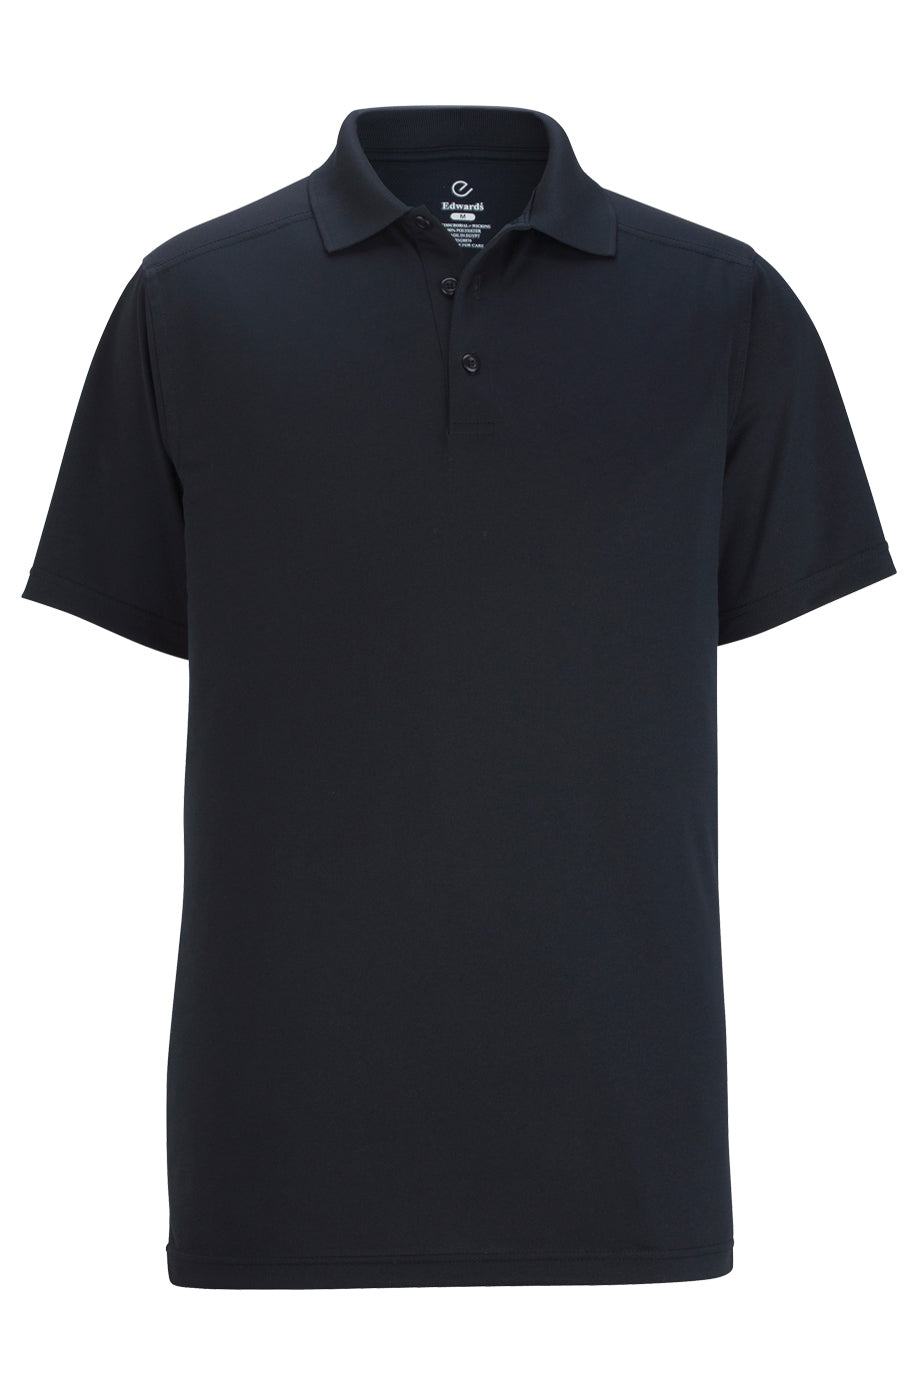 Edwards Snag-Proof Polo 1512 for Men Navy